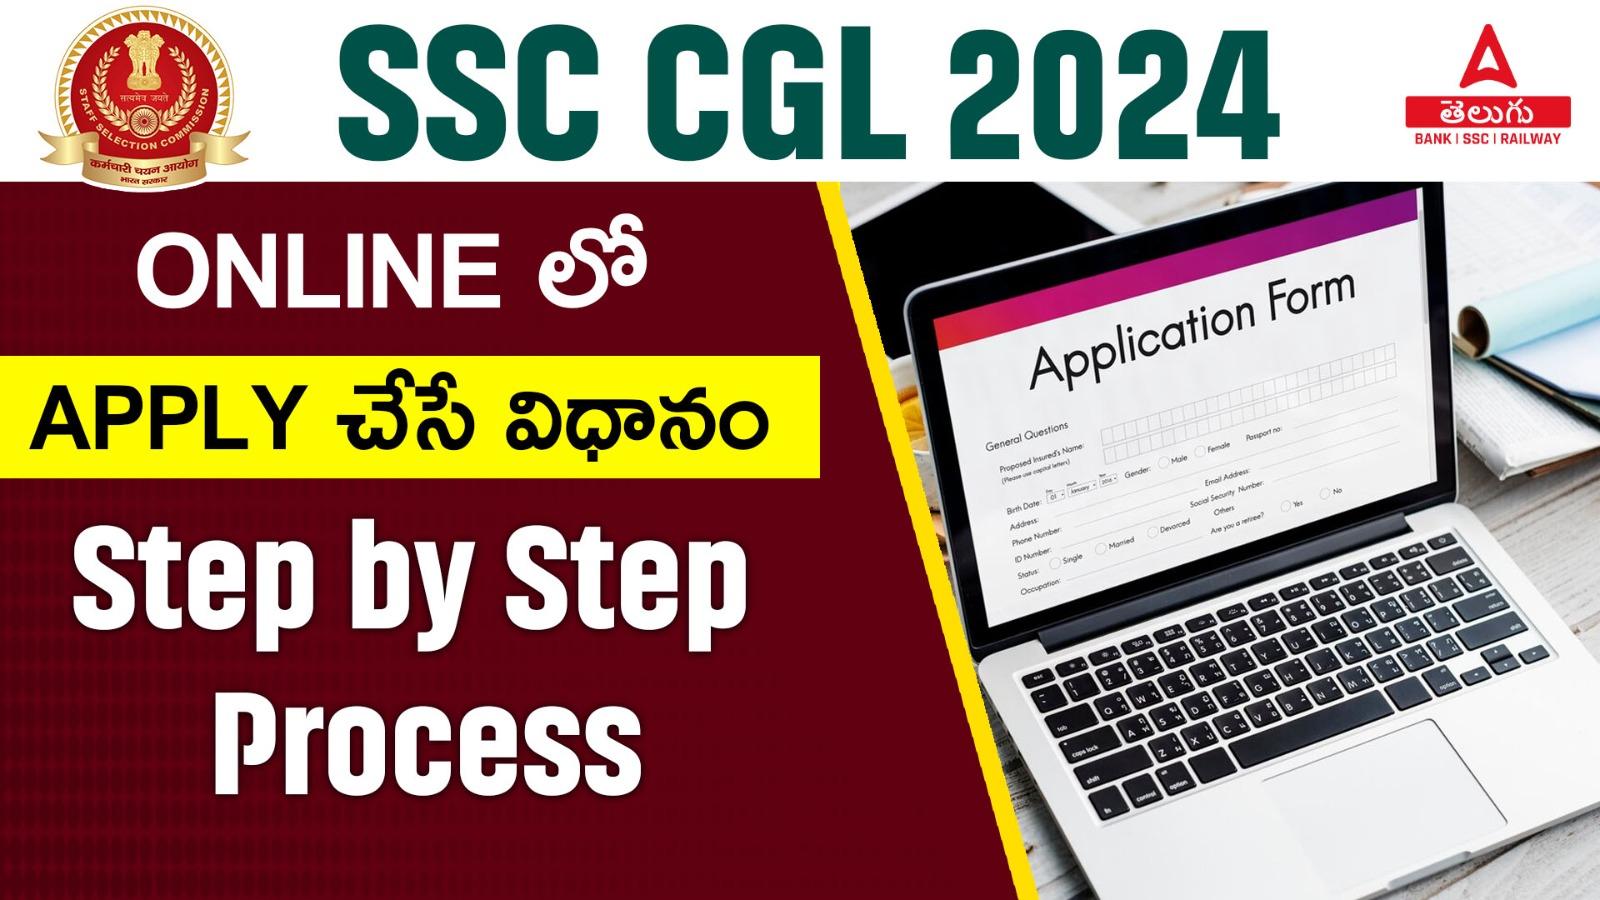 How to Apply for SSC CGL 2024 Online?